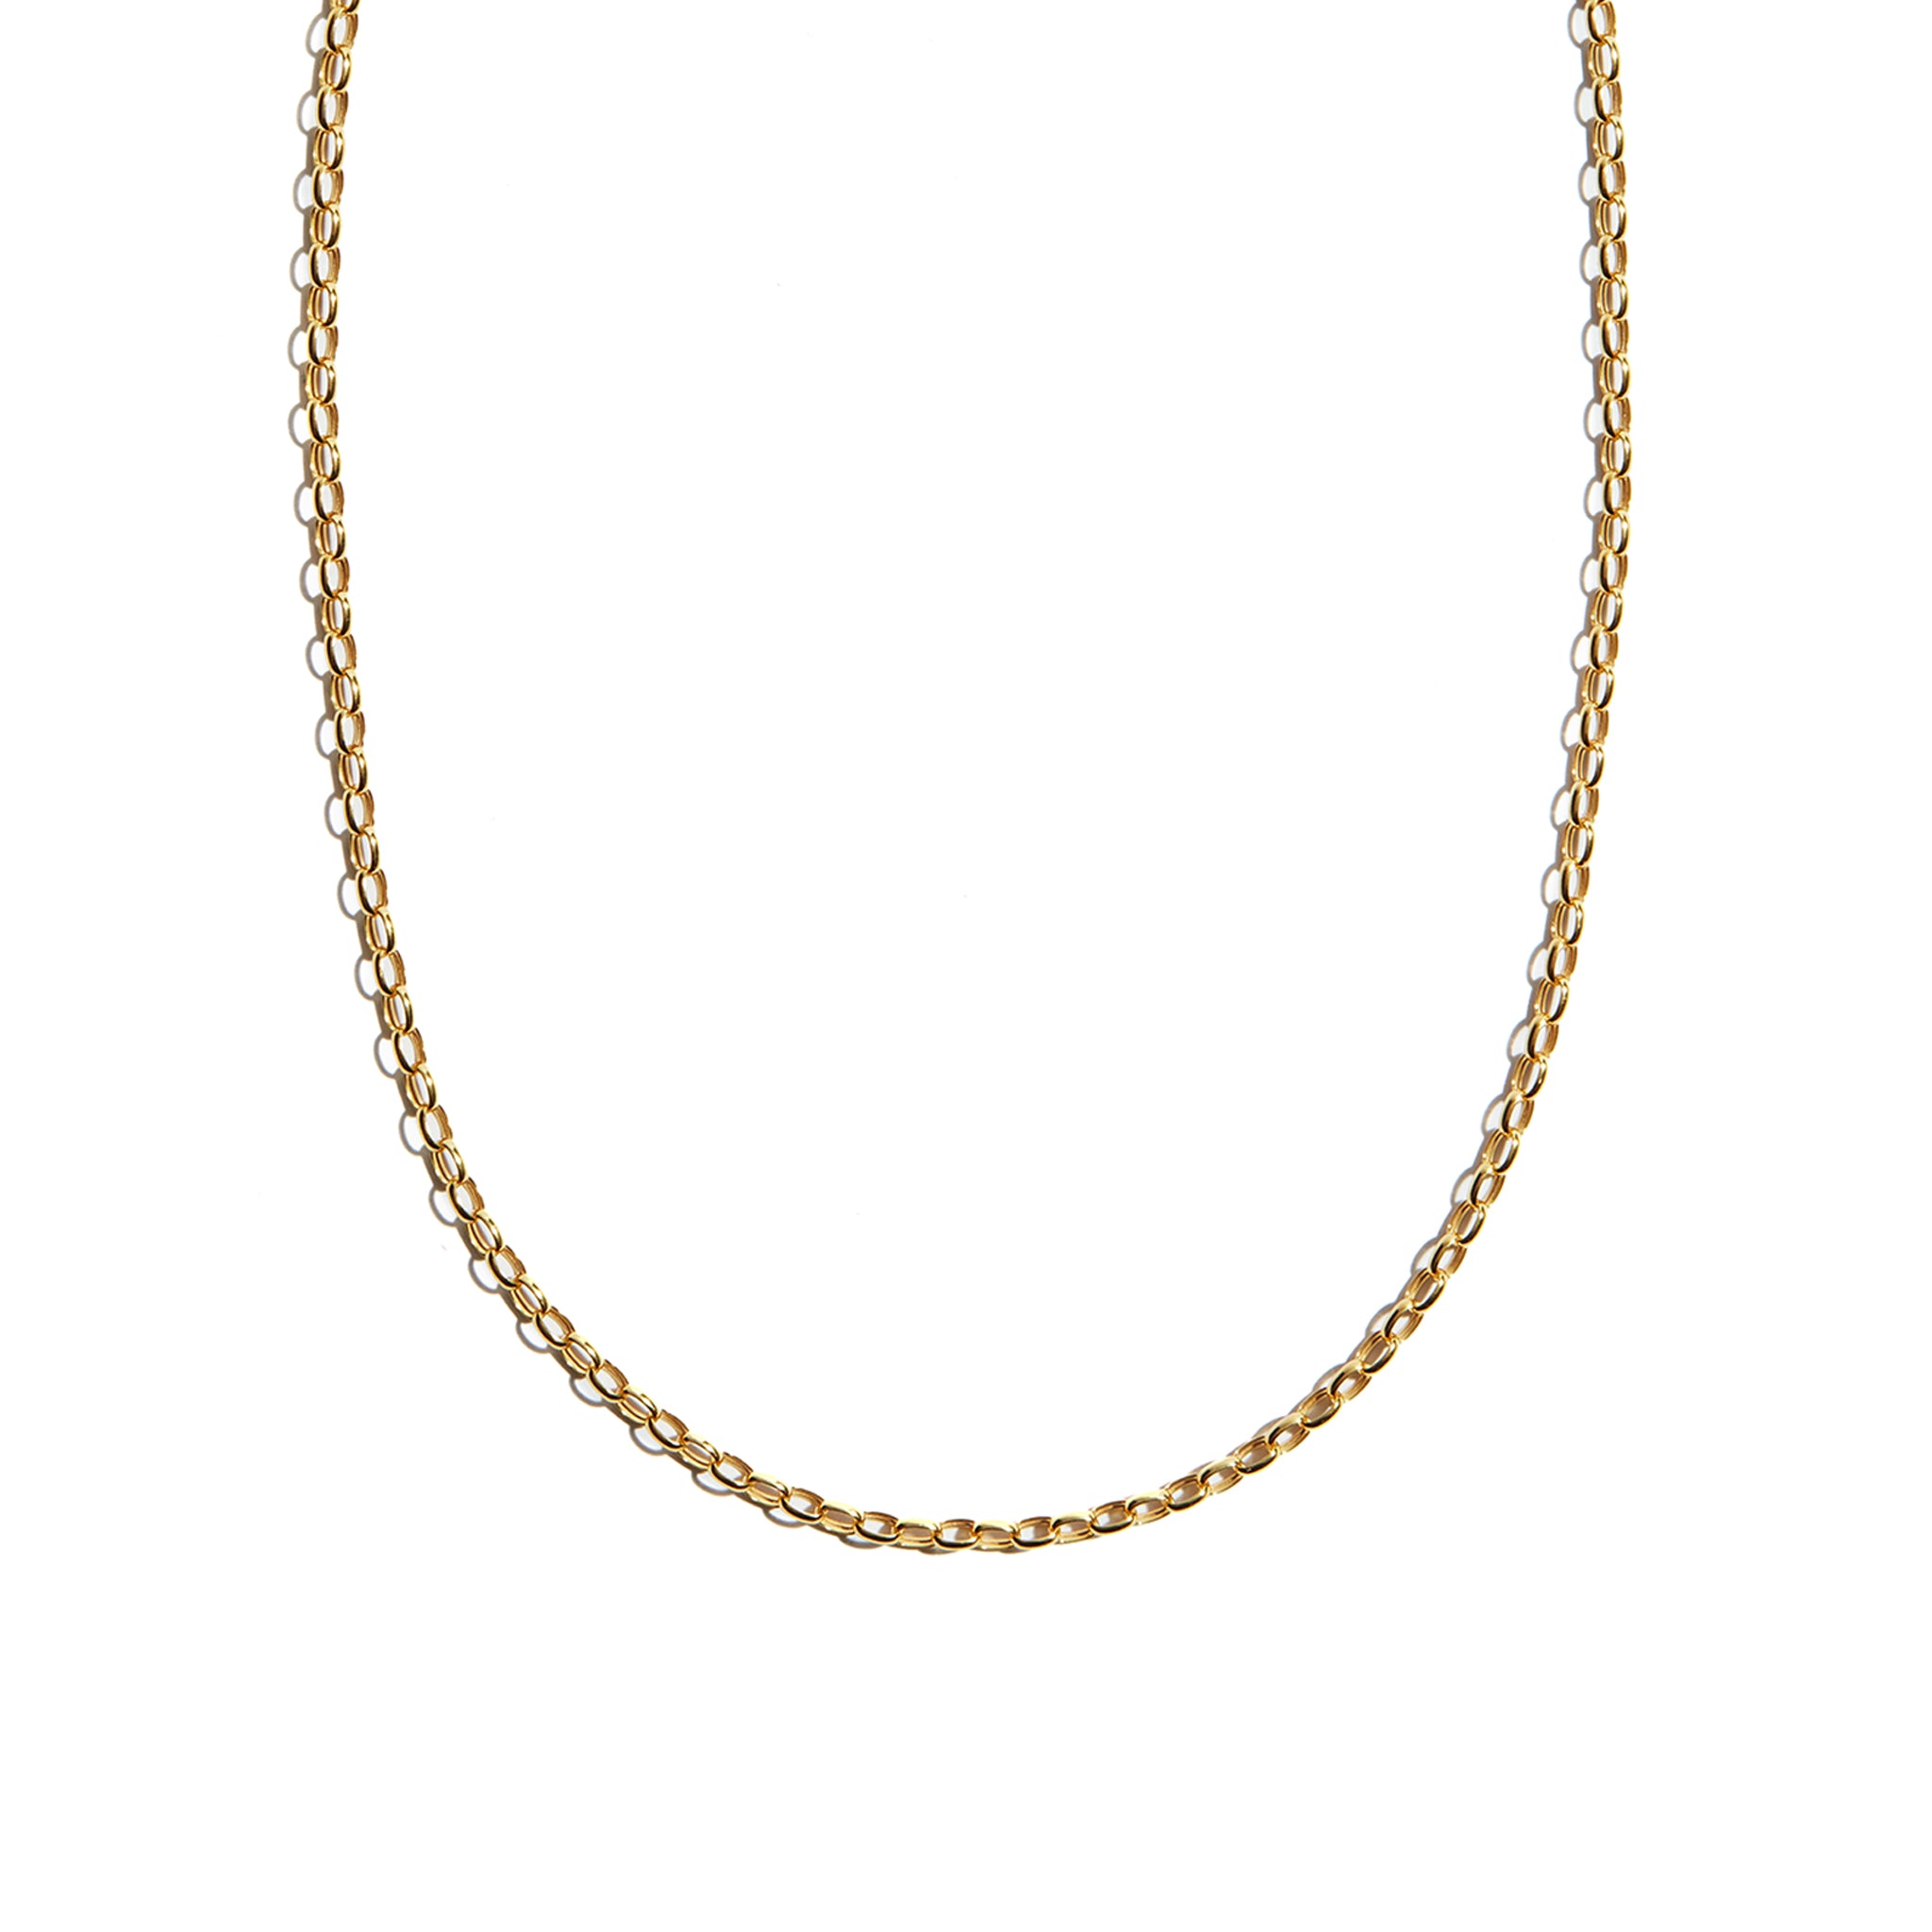 Elevate your ensemble with the 9 carat yellow gold Oval Belcher Chain. This classic accessoryis perfect for adding a touch of sophistication and elegance to any outfit.